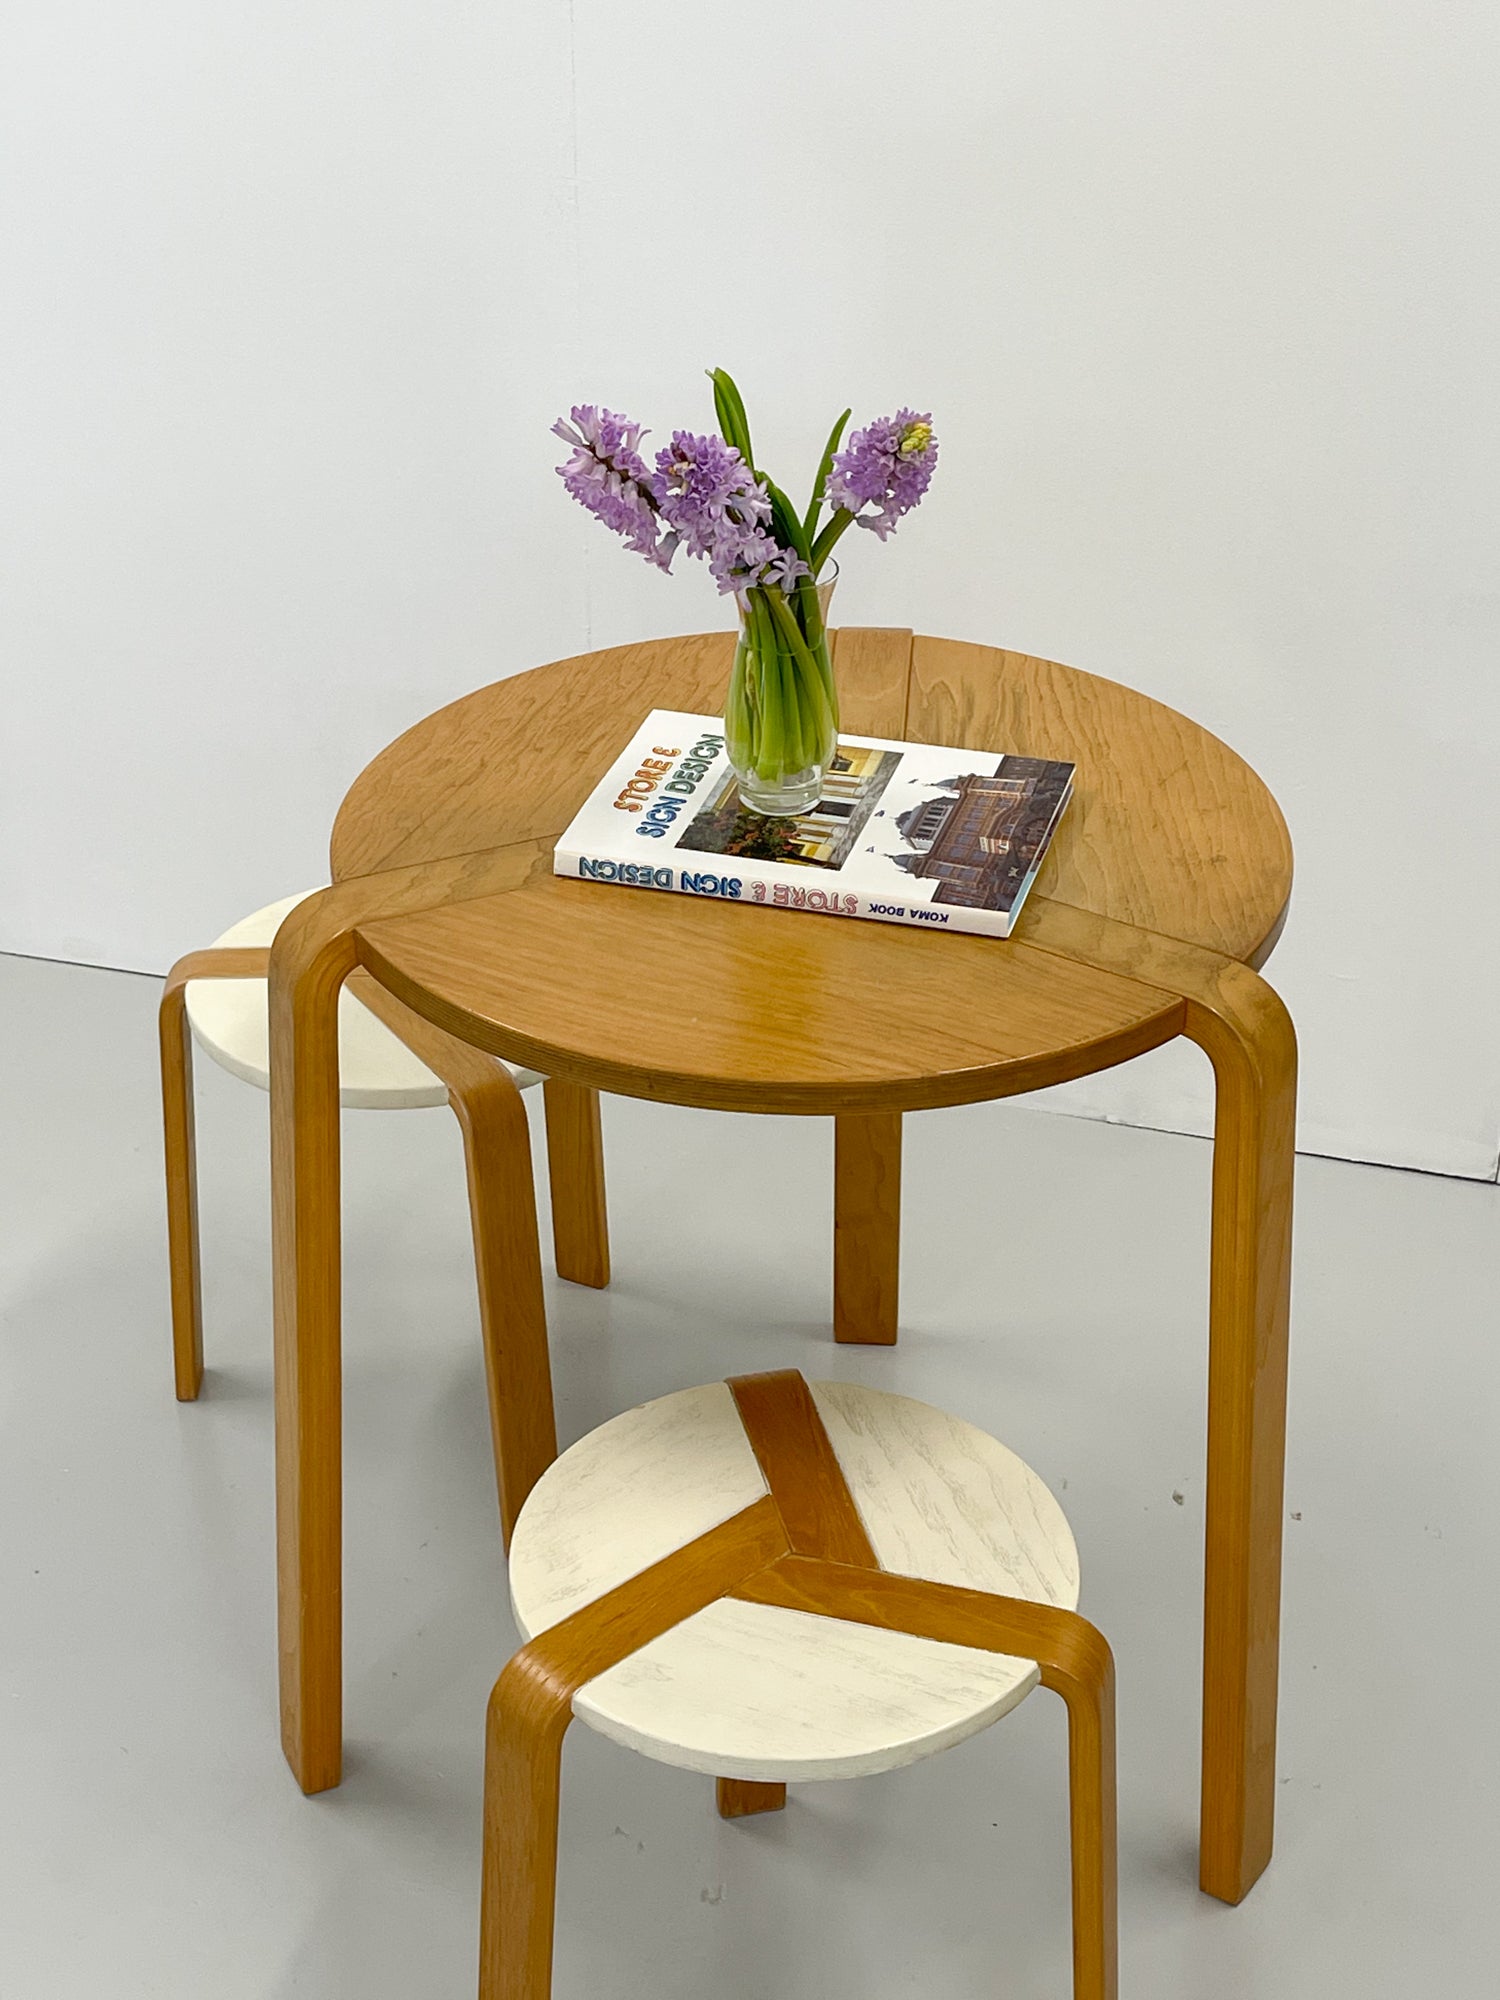 1970s Birch Jocker Table and Stools by A. Simonit & G. Del Piero for Olivo Srl